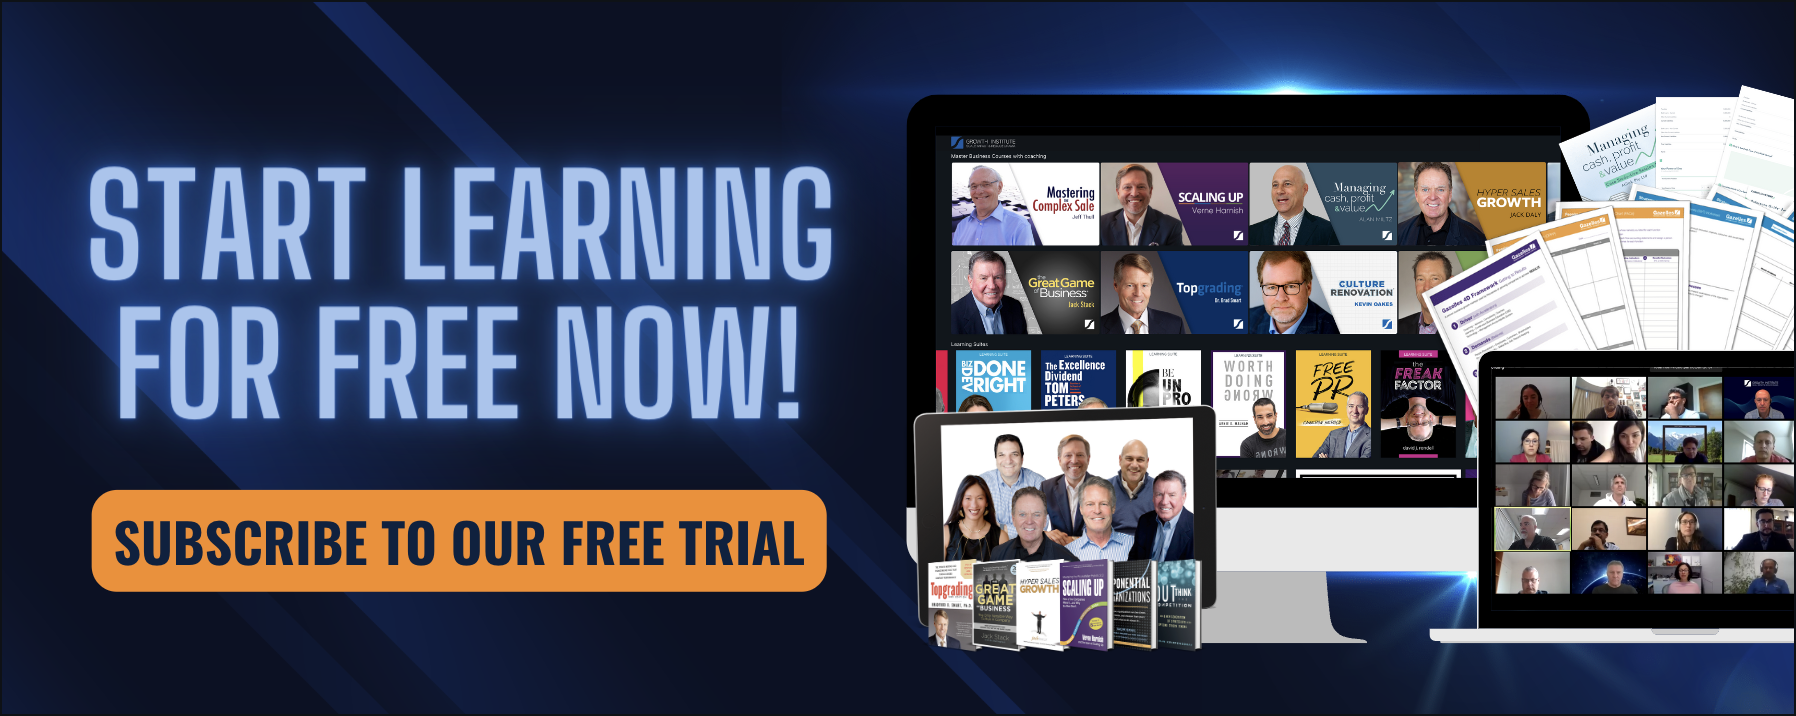 Start our free trial and explore our course library